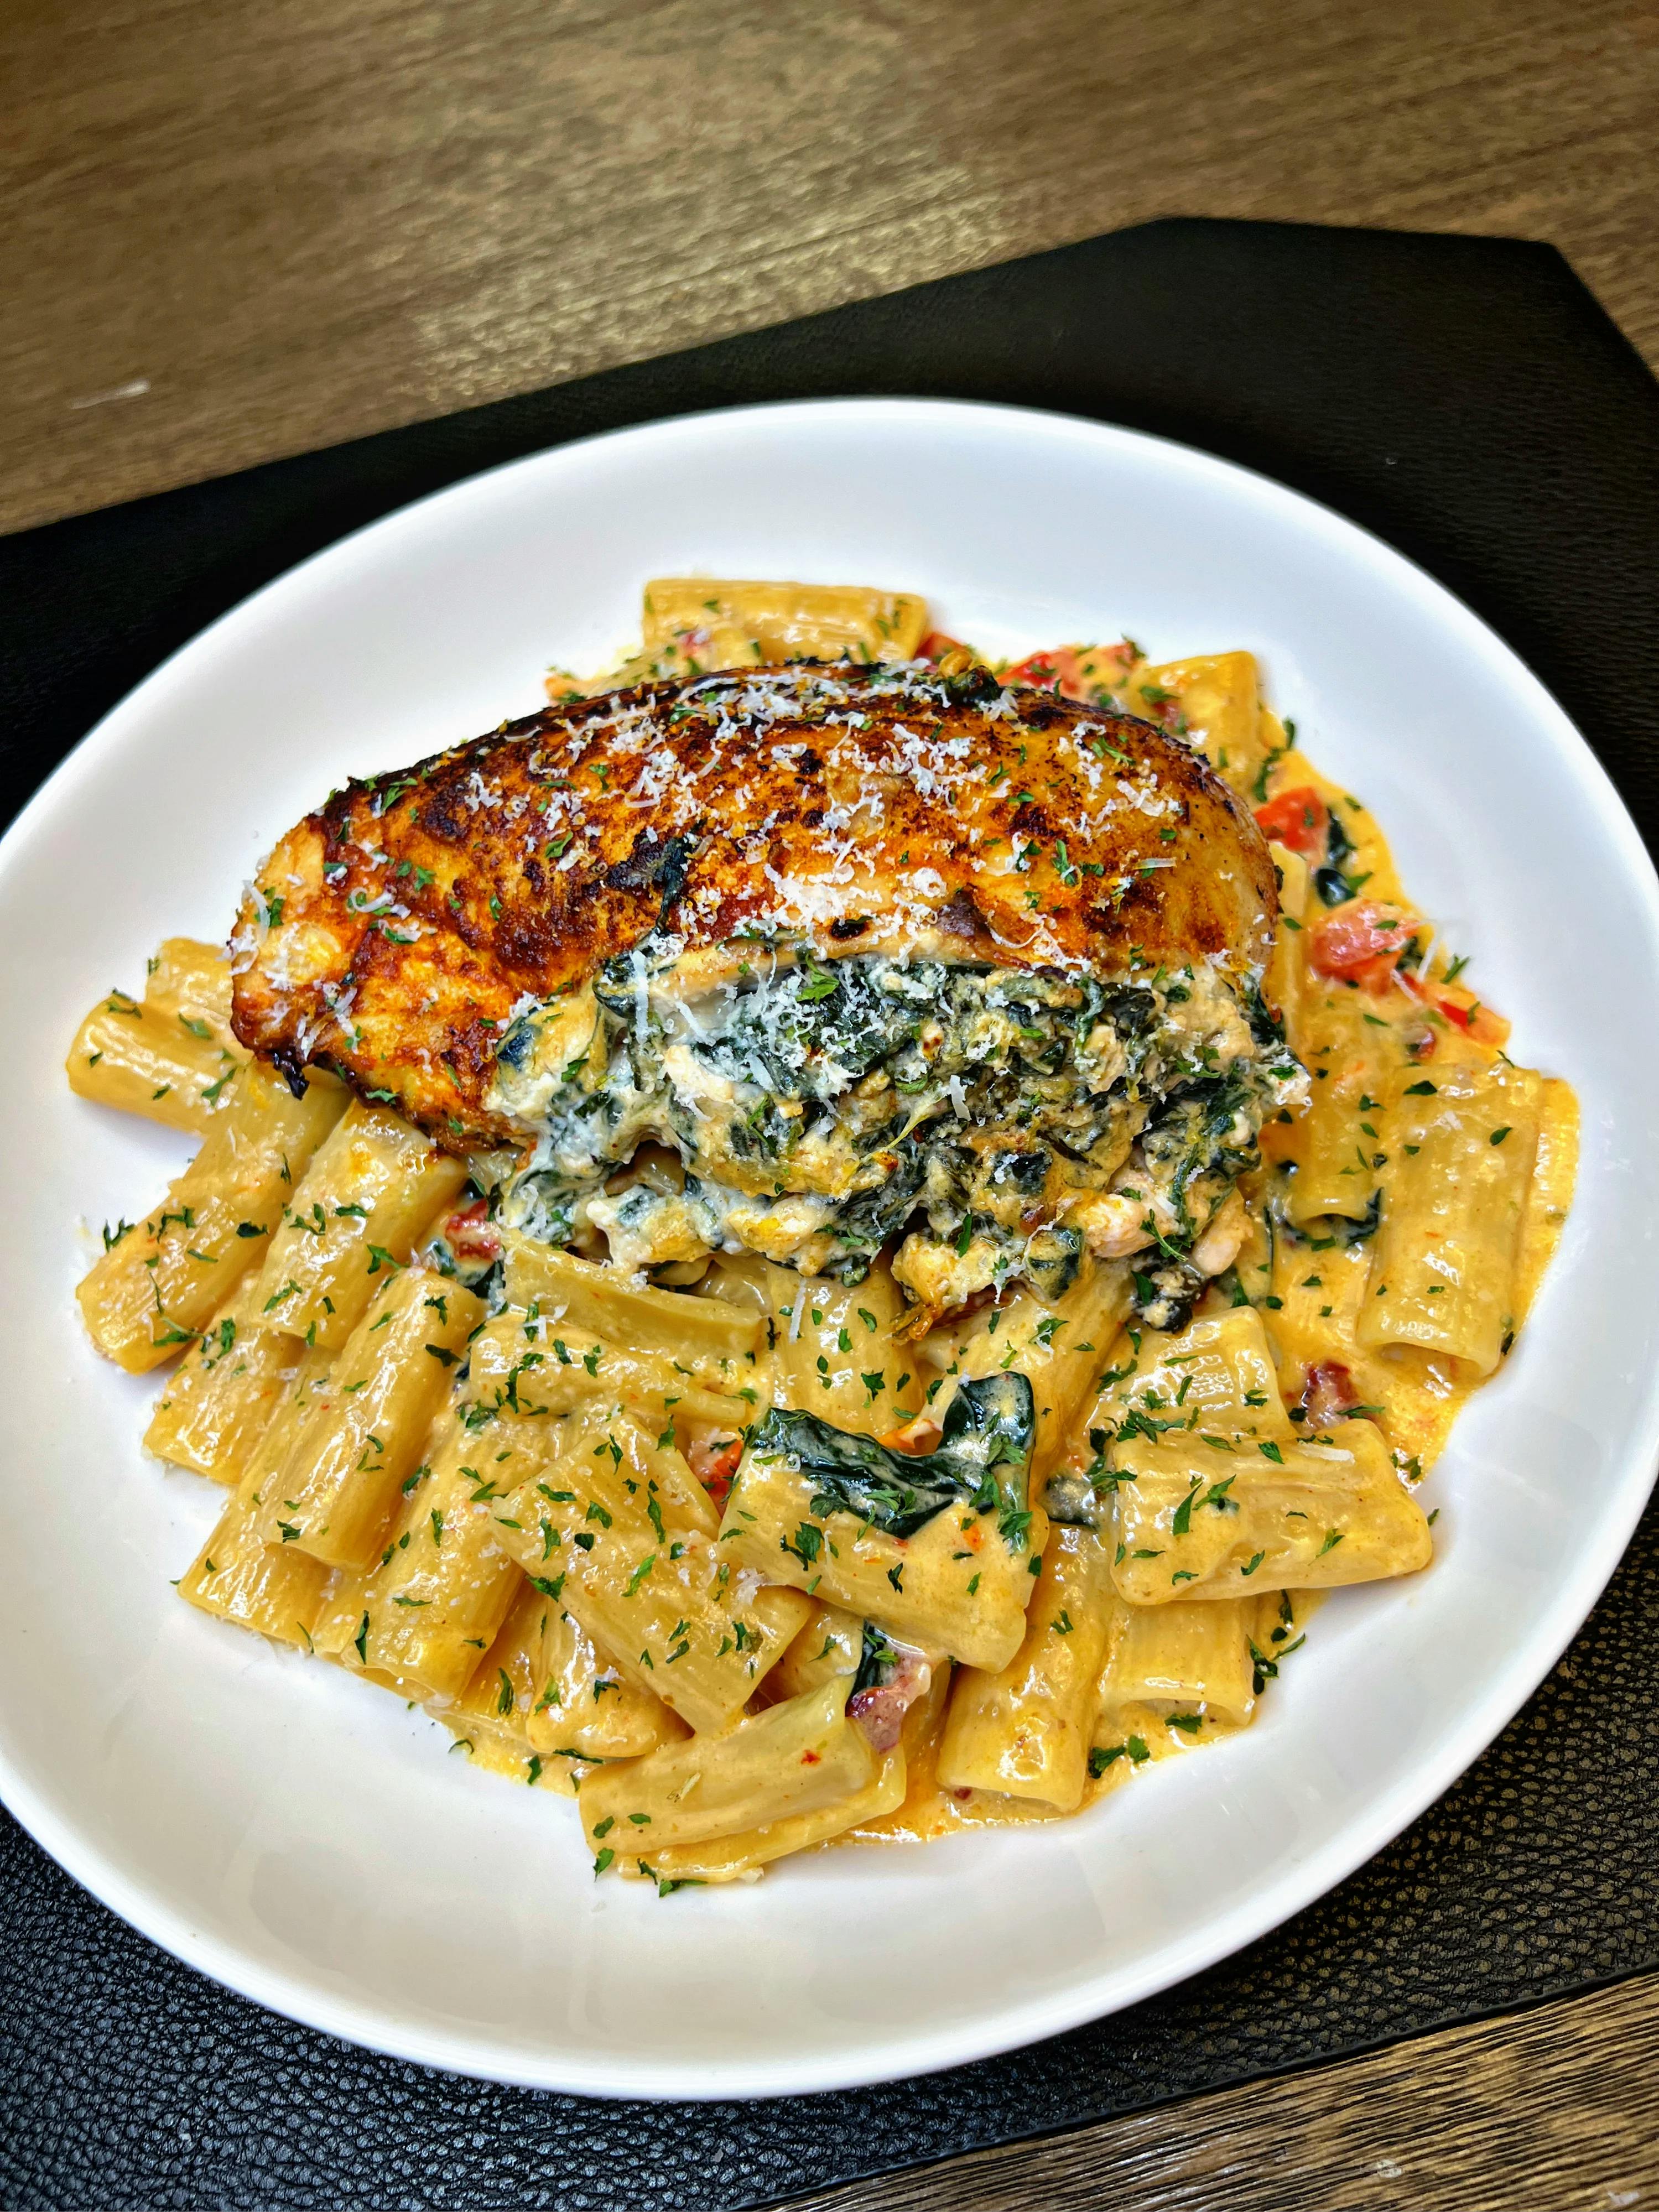 Picture of Stuffed Chicken Tuscan Pasta